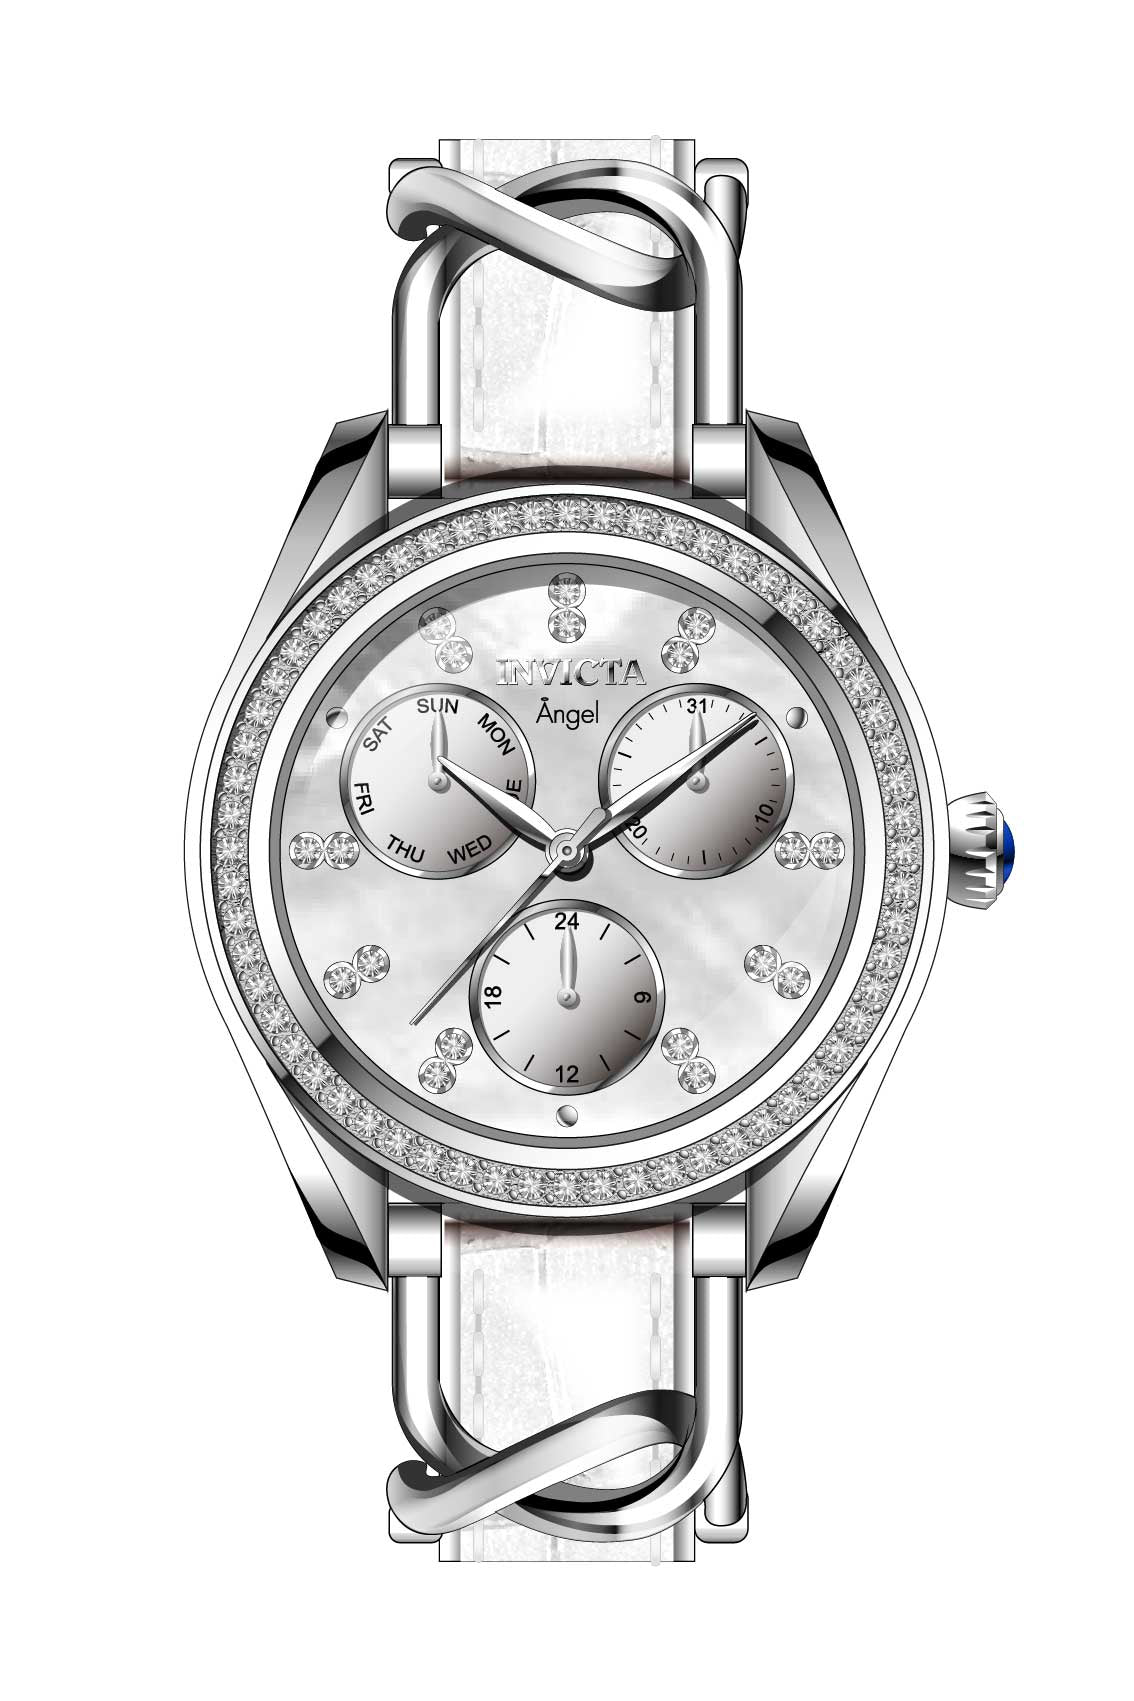 Band for Invicta Angel Lady 31205